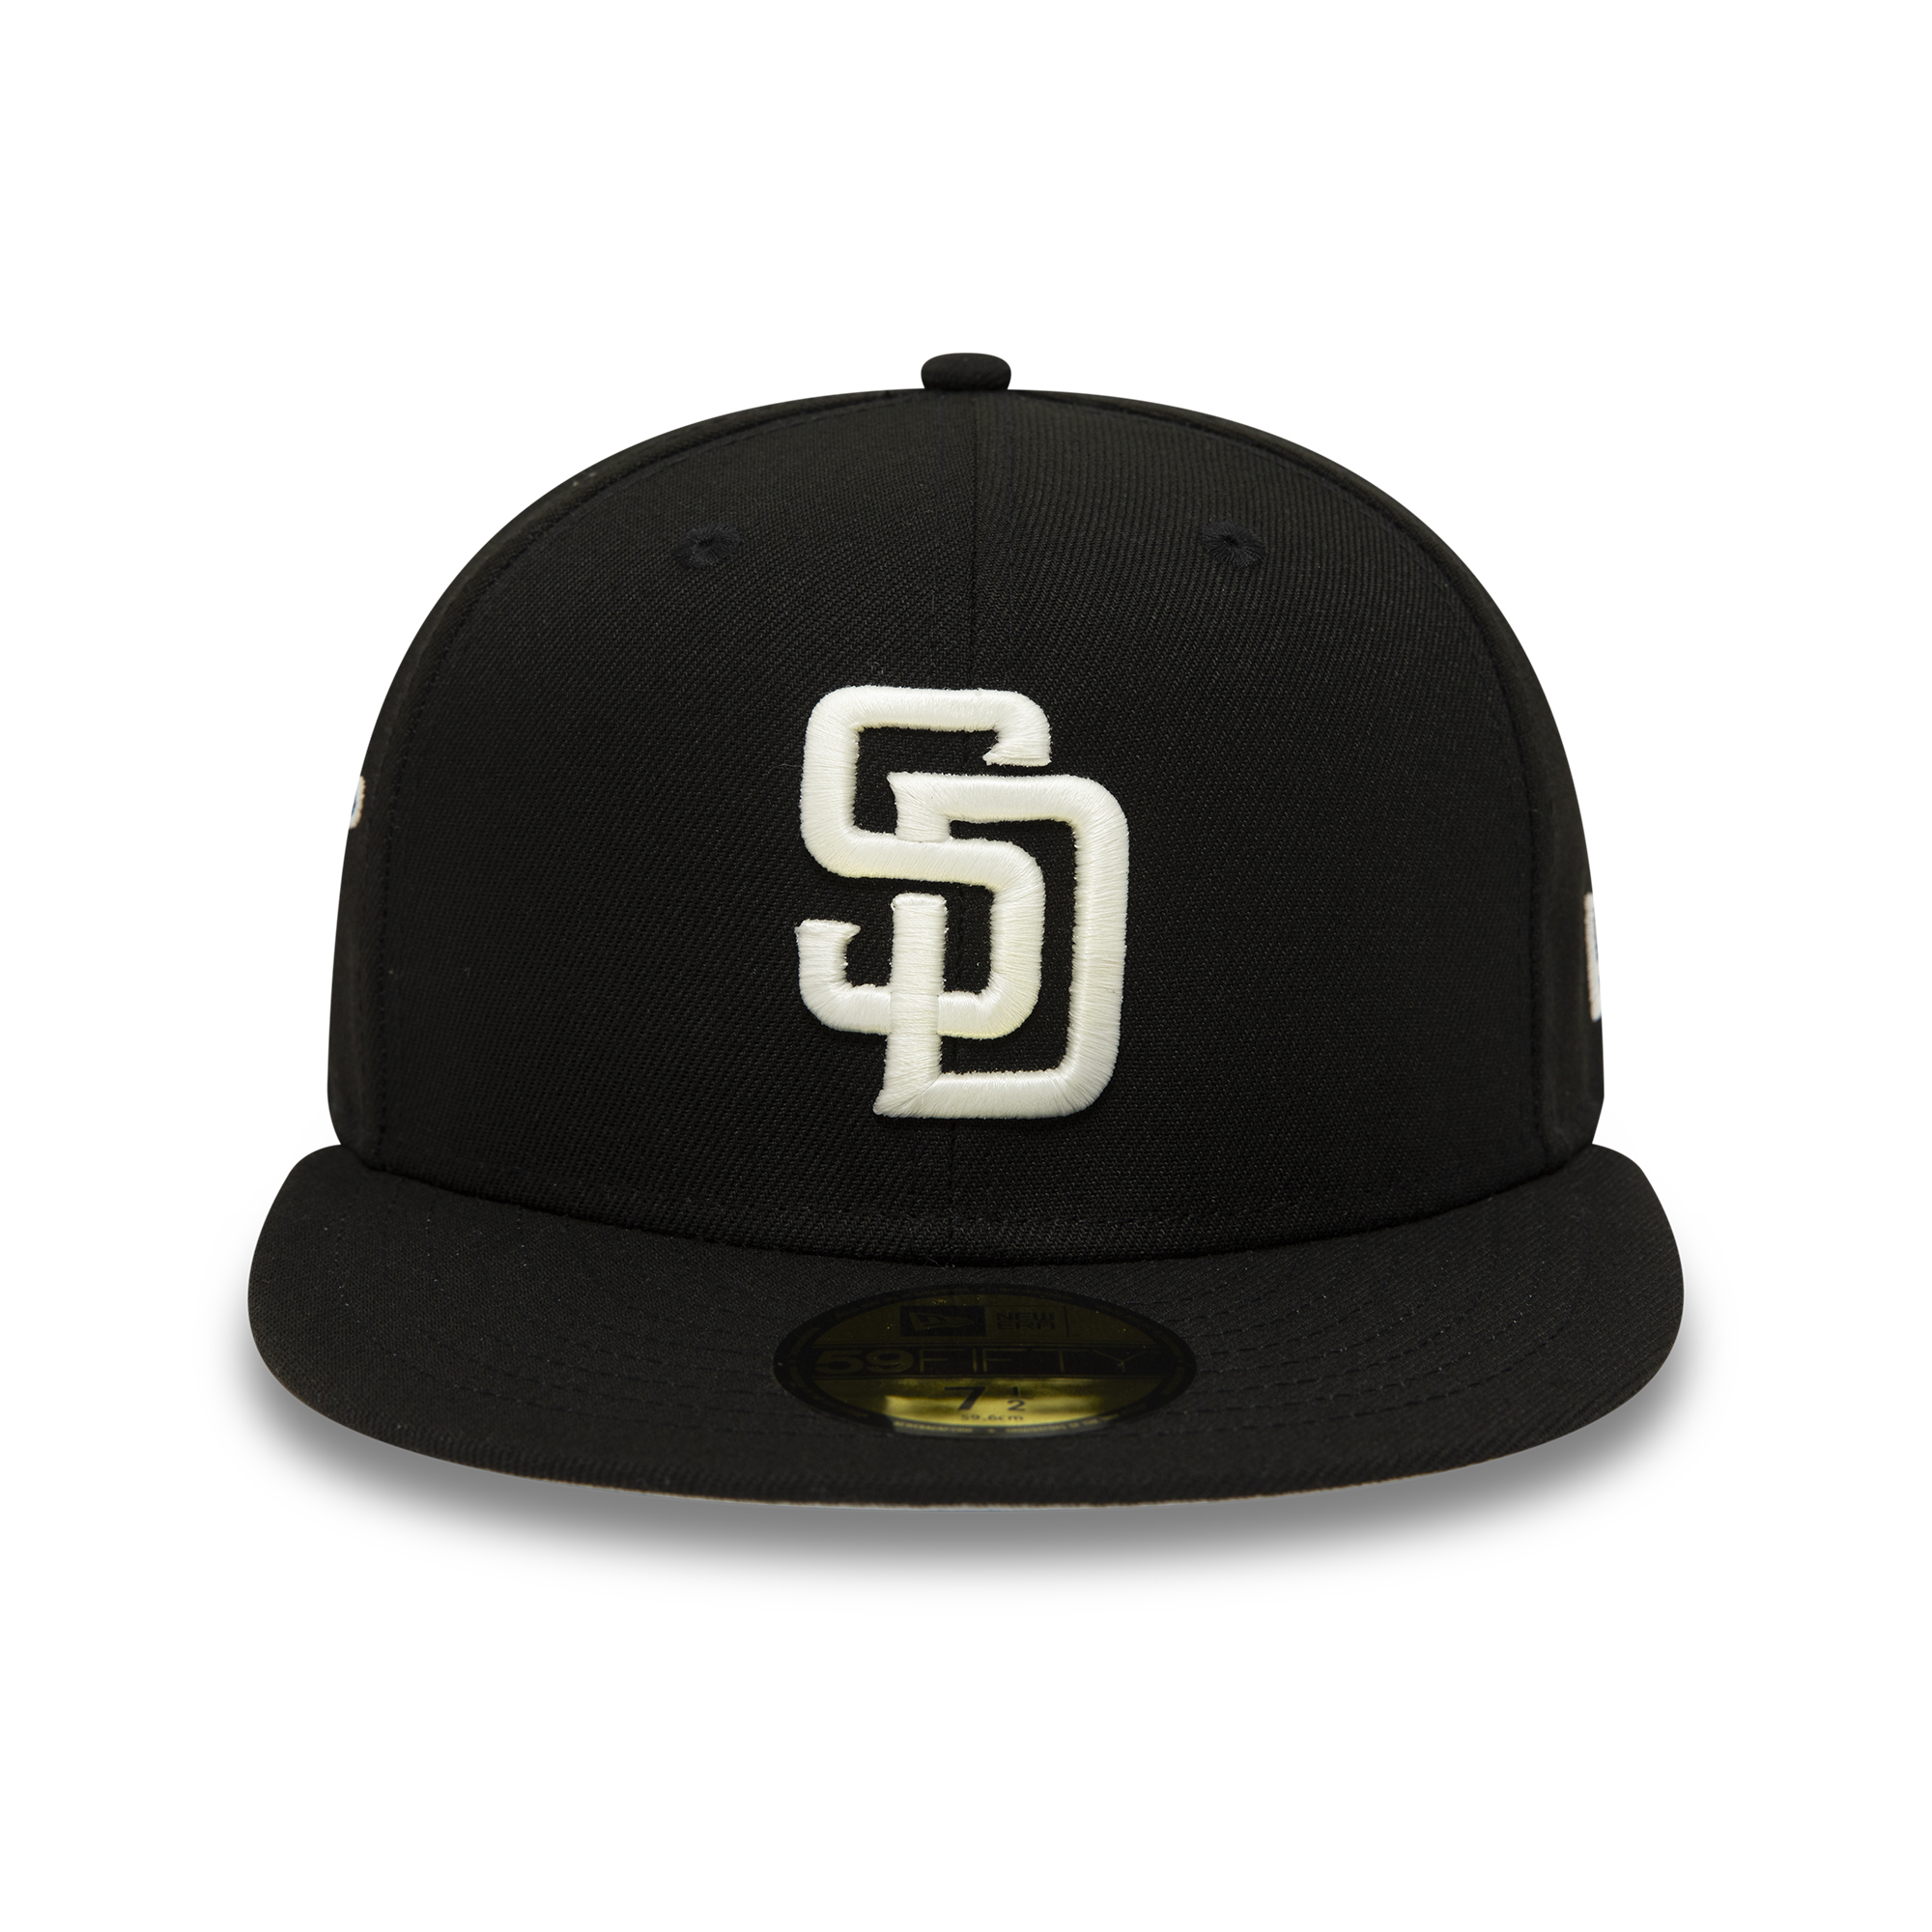 San Diego Padres Glow in the Dark Black 59FIFTY Fitted Cap